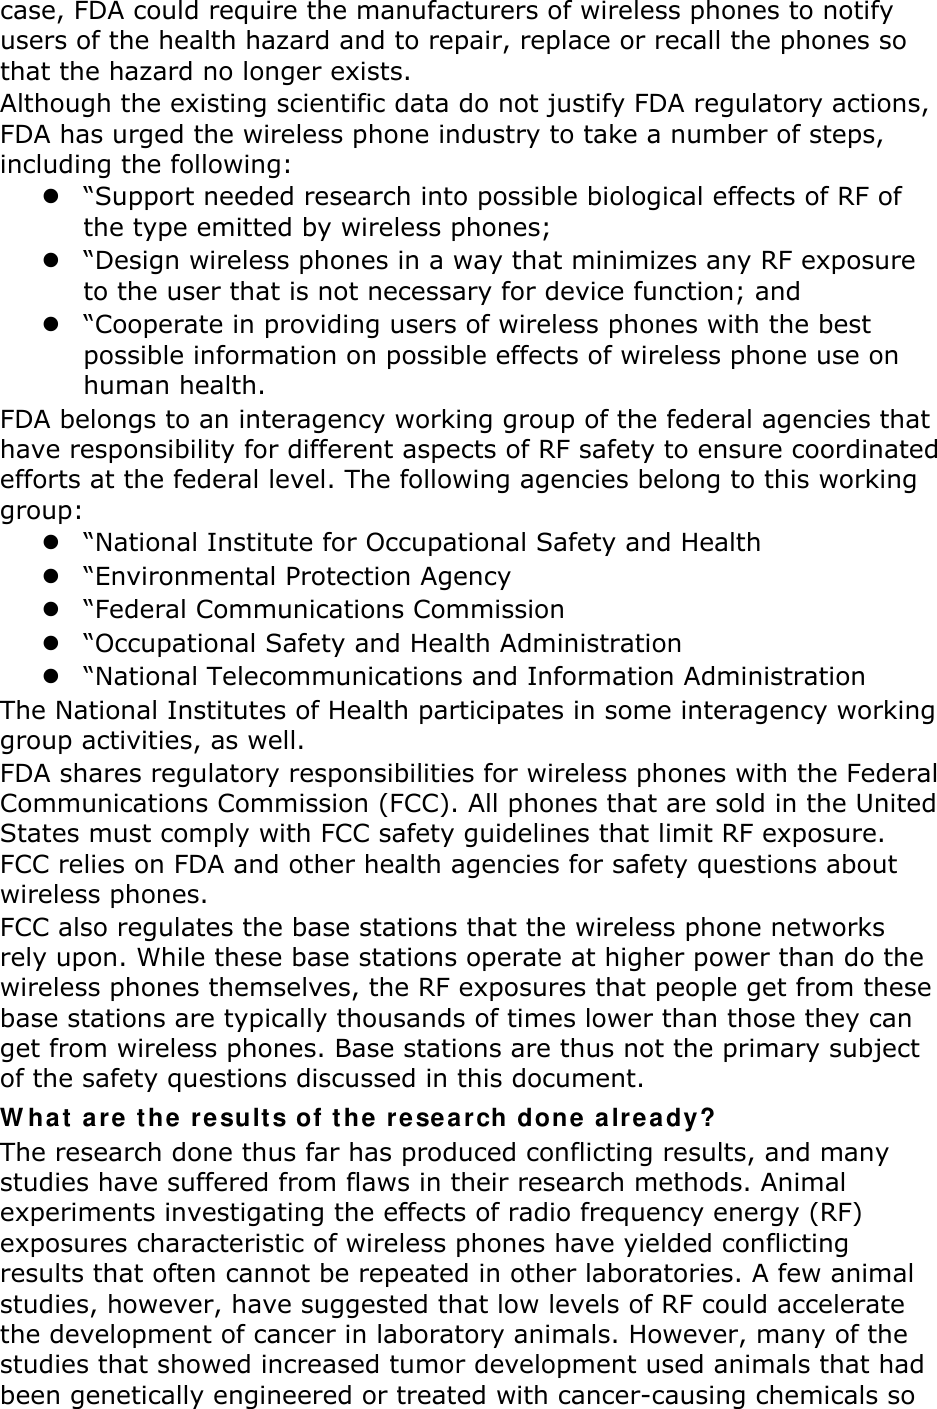 case, FDA could require the manufacturers of wireless phones to notify users of the health hazard and to repair, replace or recall the phones so that the hazard no longer exists. Although the existing scientific data do not justify FDA regulatory actions, FDA has urged the wireless phone industry to take a number of steps, including the following:  “Support needed research into possible biological effects of RF of the type emitted by wireless phones;  “Design wireless phones in a way that minimizes any RF exposure to the user that is not necessary for device function; and  “Cooperate in providing users of wireless phones with the best possible information on possible effects of wireless phone use on human health. FDA belongs to an interagency working group of the federal agencies that have responsibility for different aspects of RF safety to ensure coordinated efforts at the federal level. The following agencies belong to this working group:  “National Institute for Occupational Safety and Health  “Environmental Protection Agency  “Federal Communications Commission  “Occupational Safety and Health Administration  “National Telecommunications and Information Administration The National Institutes of Health participates in some interagency working group activities, as well. FDA shares regulatory responsibilities for wireless phones with the Federal Communications Commission (FCC). All phones that are sold in the United States must comply with FCC safety guidelines that limit RF exposure. FCC relies on FDA and other health agencies for safety questions about wireless phones. FCC also regulates the base stations that the wireless phone networks rely upon. While these base stations operate at higher power than do the wireless phones themselves, the RF exposures that people get from these base stations are typically thousands of times lower than those they can get from wireless phones. Base stations are thus not the primary subject of the safety questions discussed in this document. W hat  are t he result s of t he research done a lready? The research done thus far has produced conflicting results, and many studies have suffered from flaws in their research methods. Animal experiments investigating the effects of radio frequency energy (RF) exposures characteristic of wireless phones have yielded conflicting results that often cannot be repeated in other laboratories. A few animal studies, however, have suggested that low levels of RF could accelerate the development of cancer in laboratory animals. However, many of the studies that showed increased tumor development used animals that had been genetically engineered or treated with cancer-causing chemicals so 